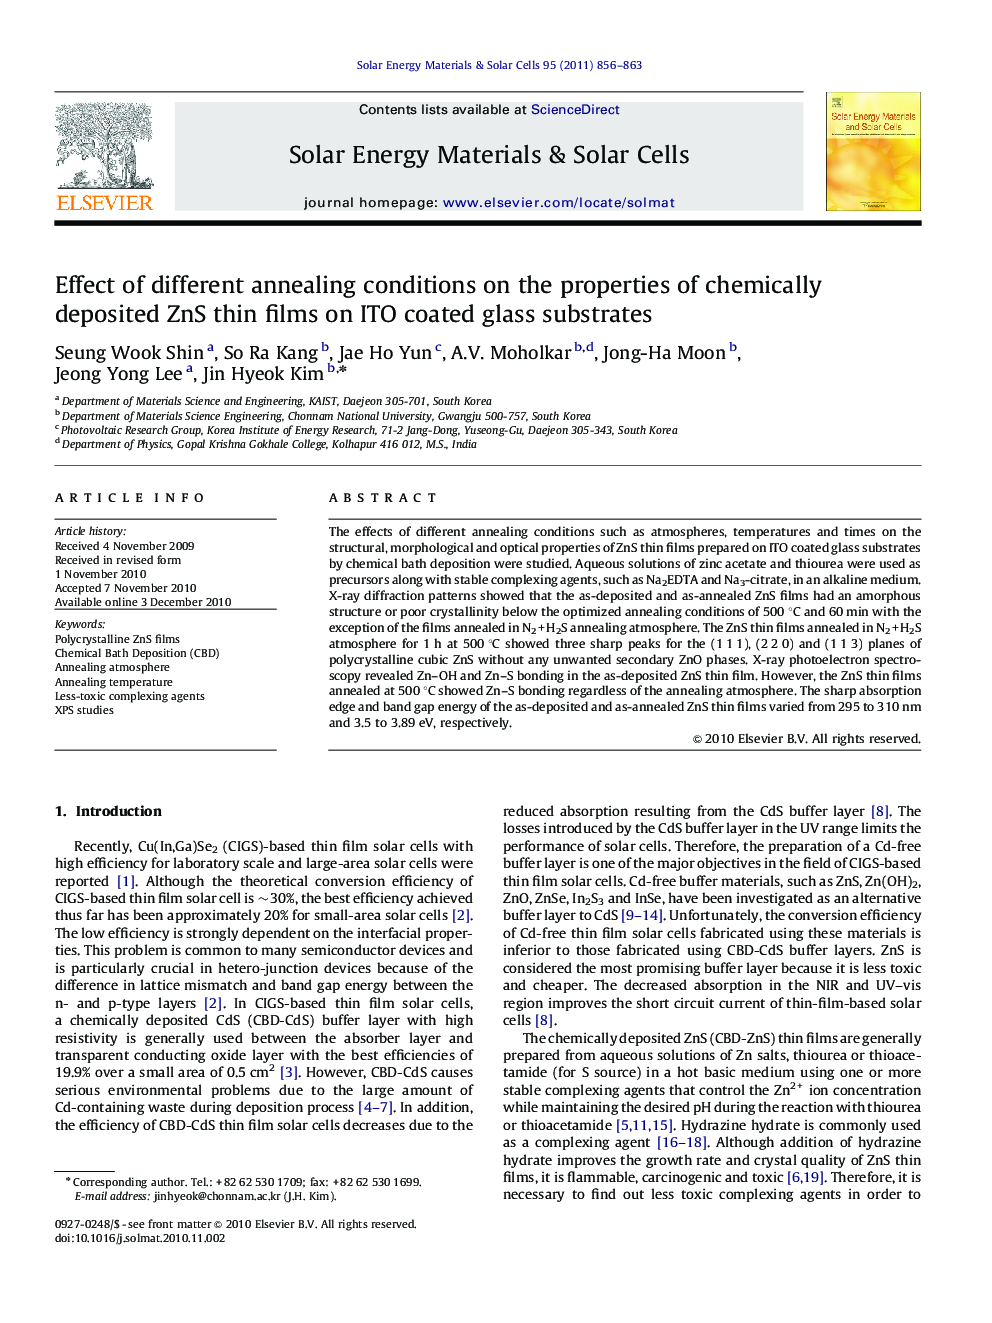 Effect of different annealing conditions on the properties of chemically deposited ZnS thin films on ITO coated glass substrates